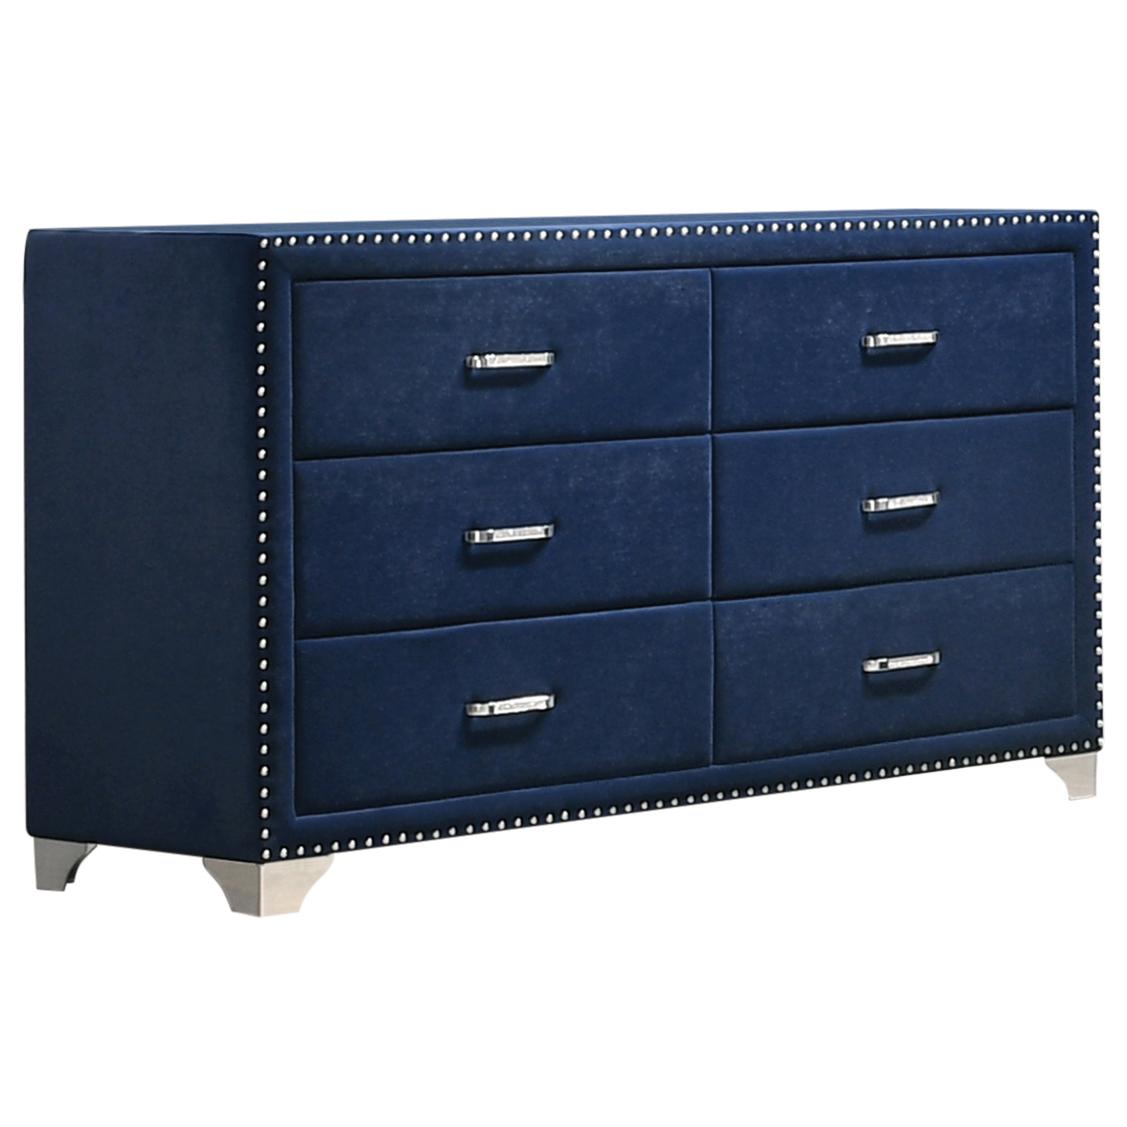 Traditional Dresser 223373 Melody 223373 in Blue 